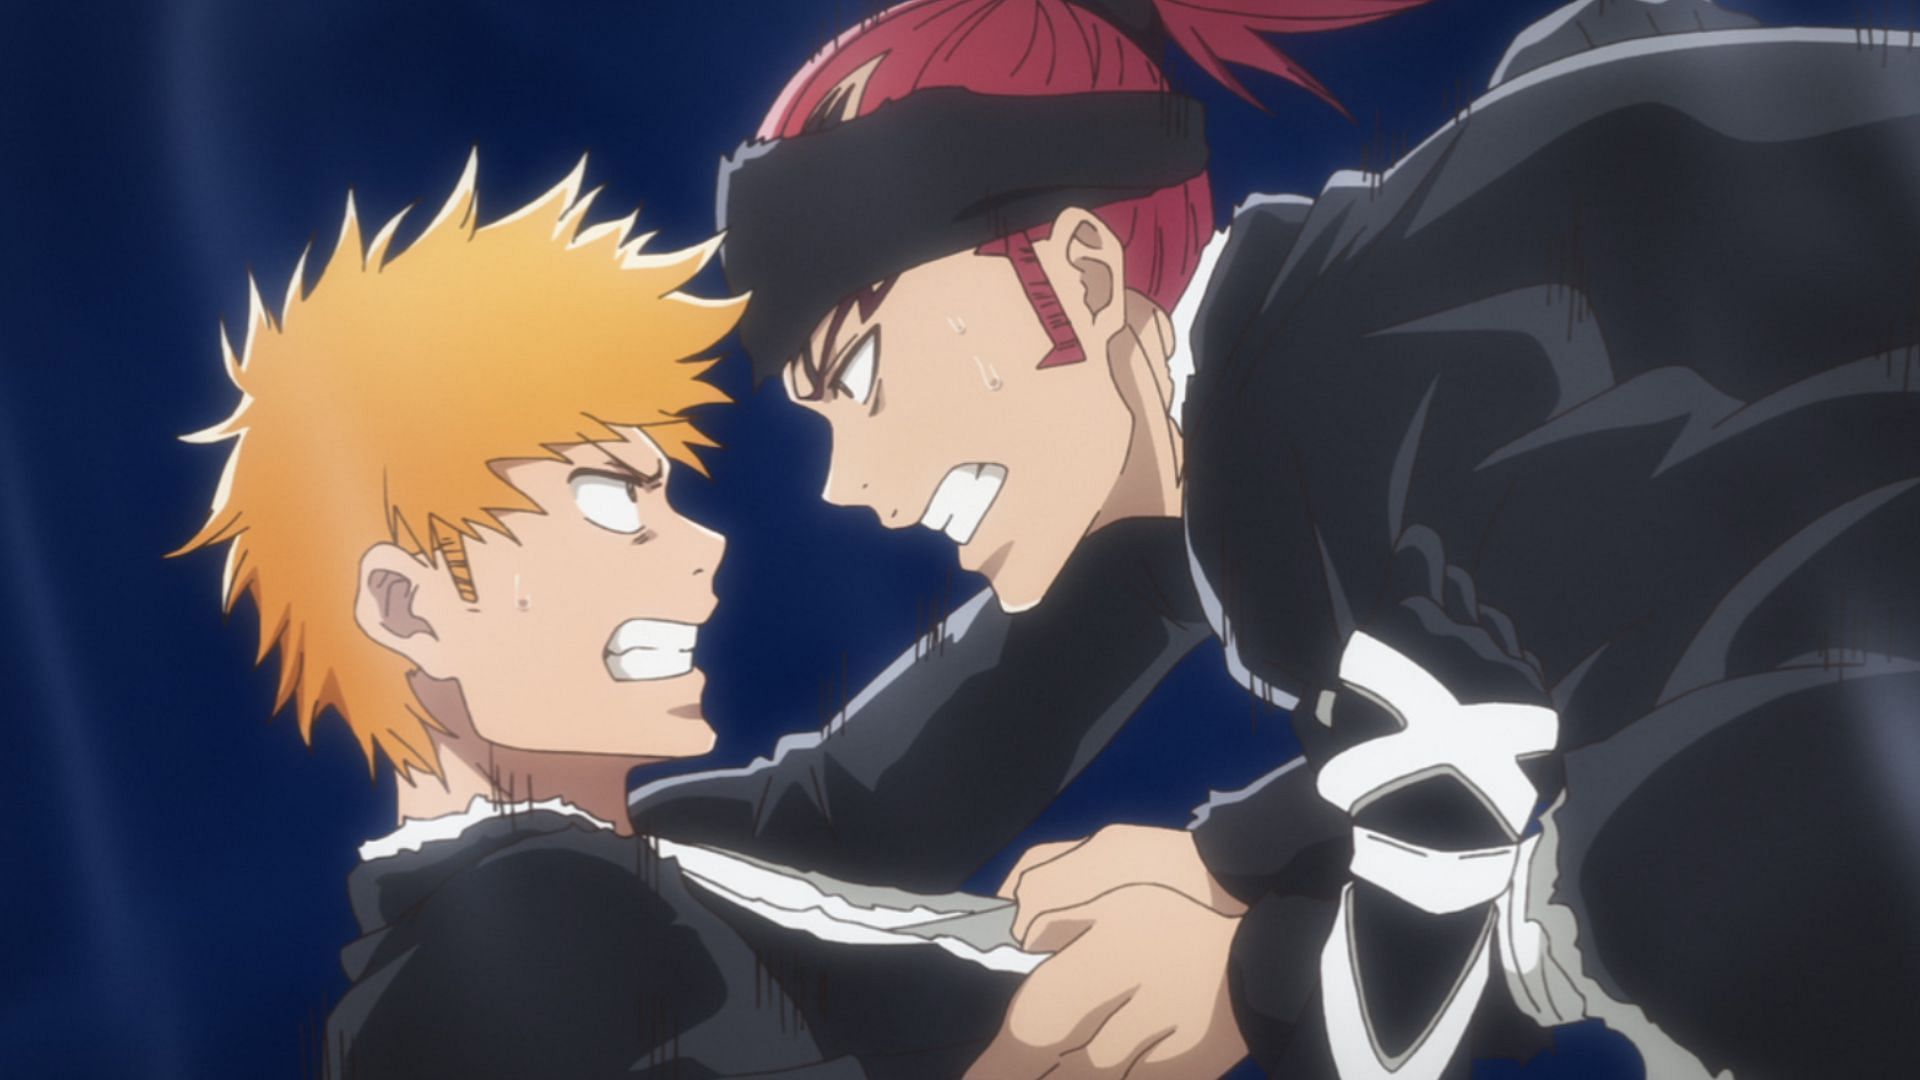 How Many Episodes of 'Bleach: Thousand-Year Blood War' Will There Be?